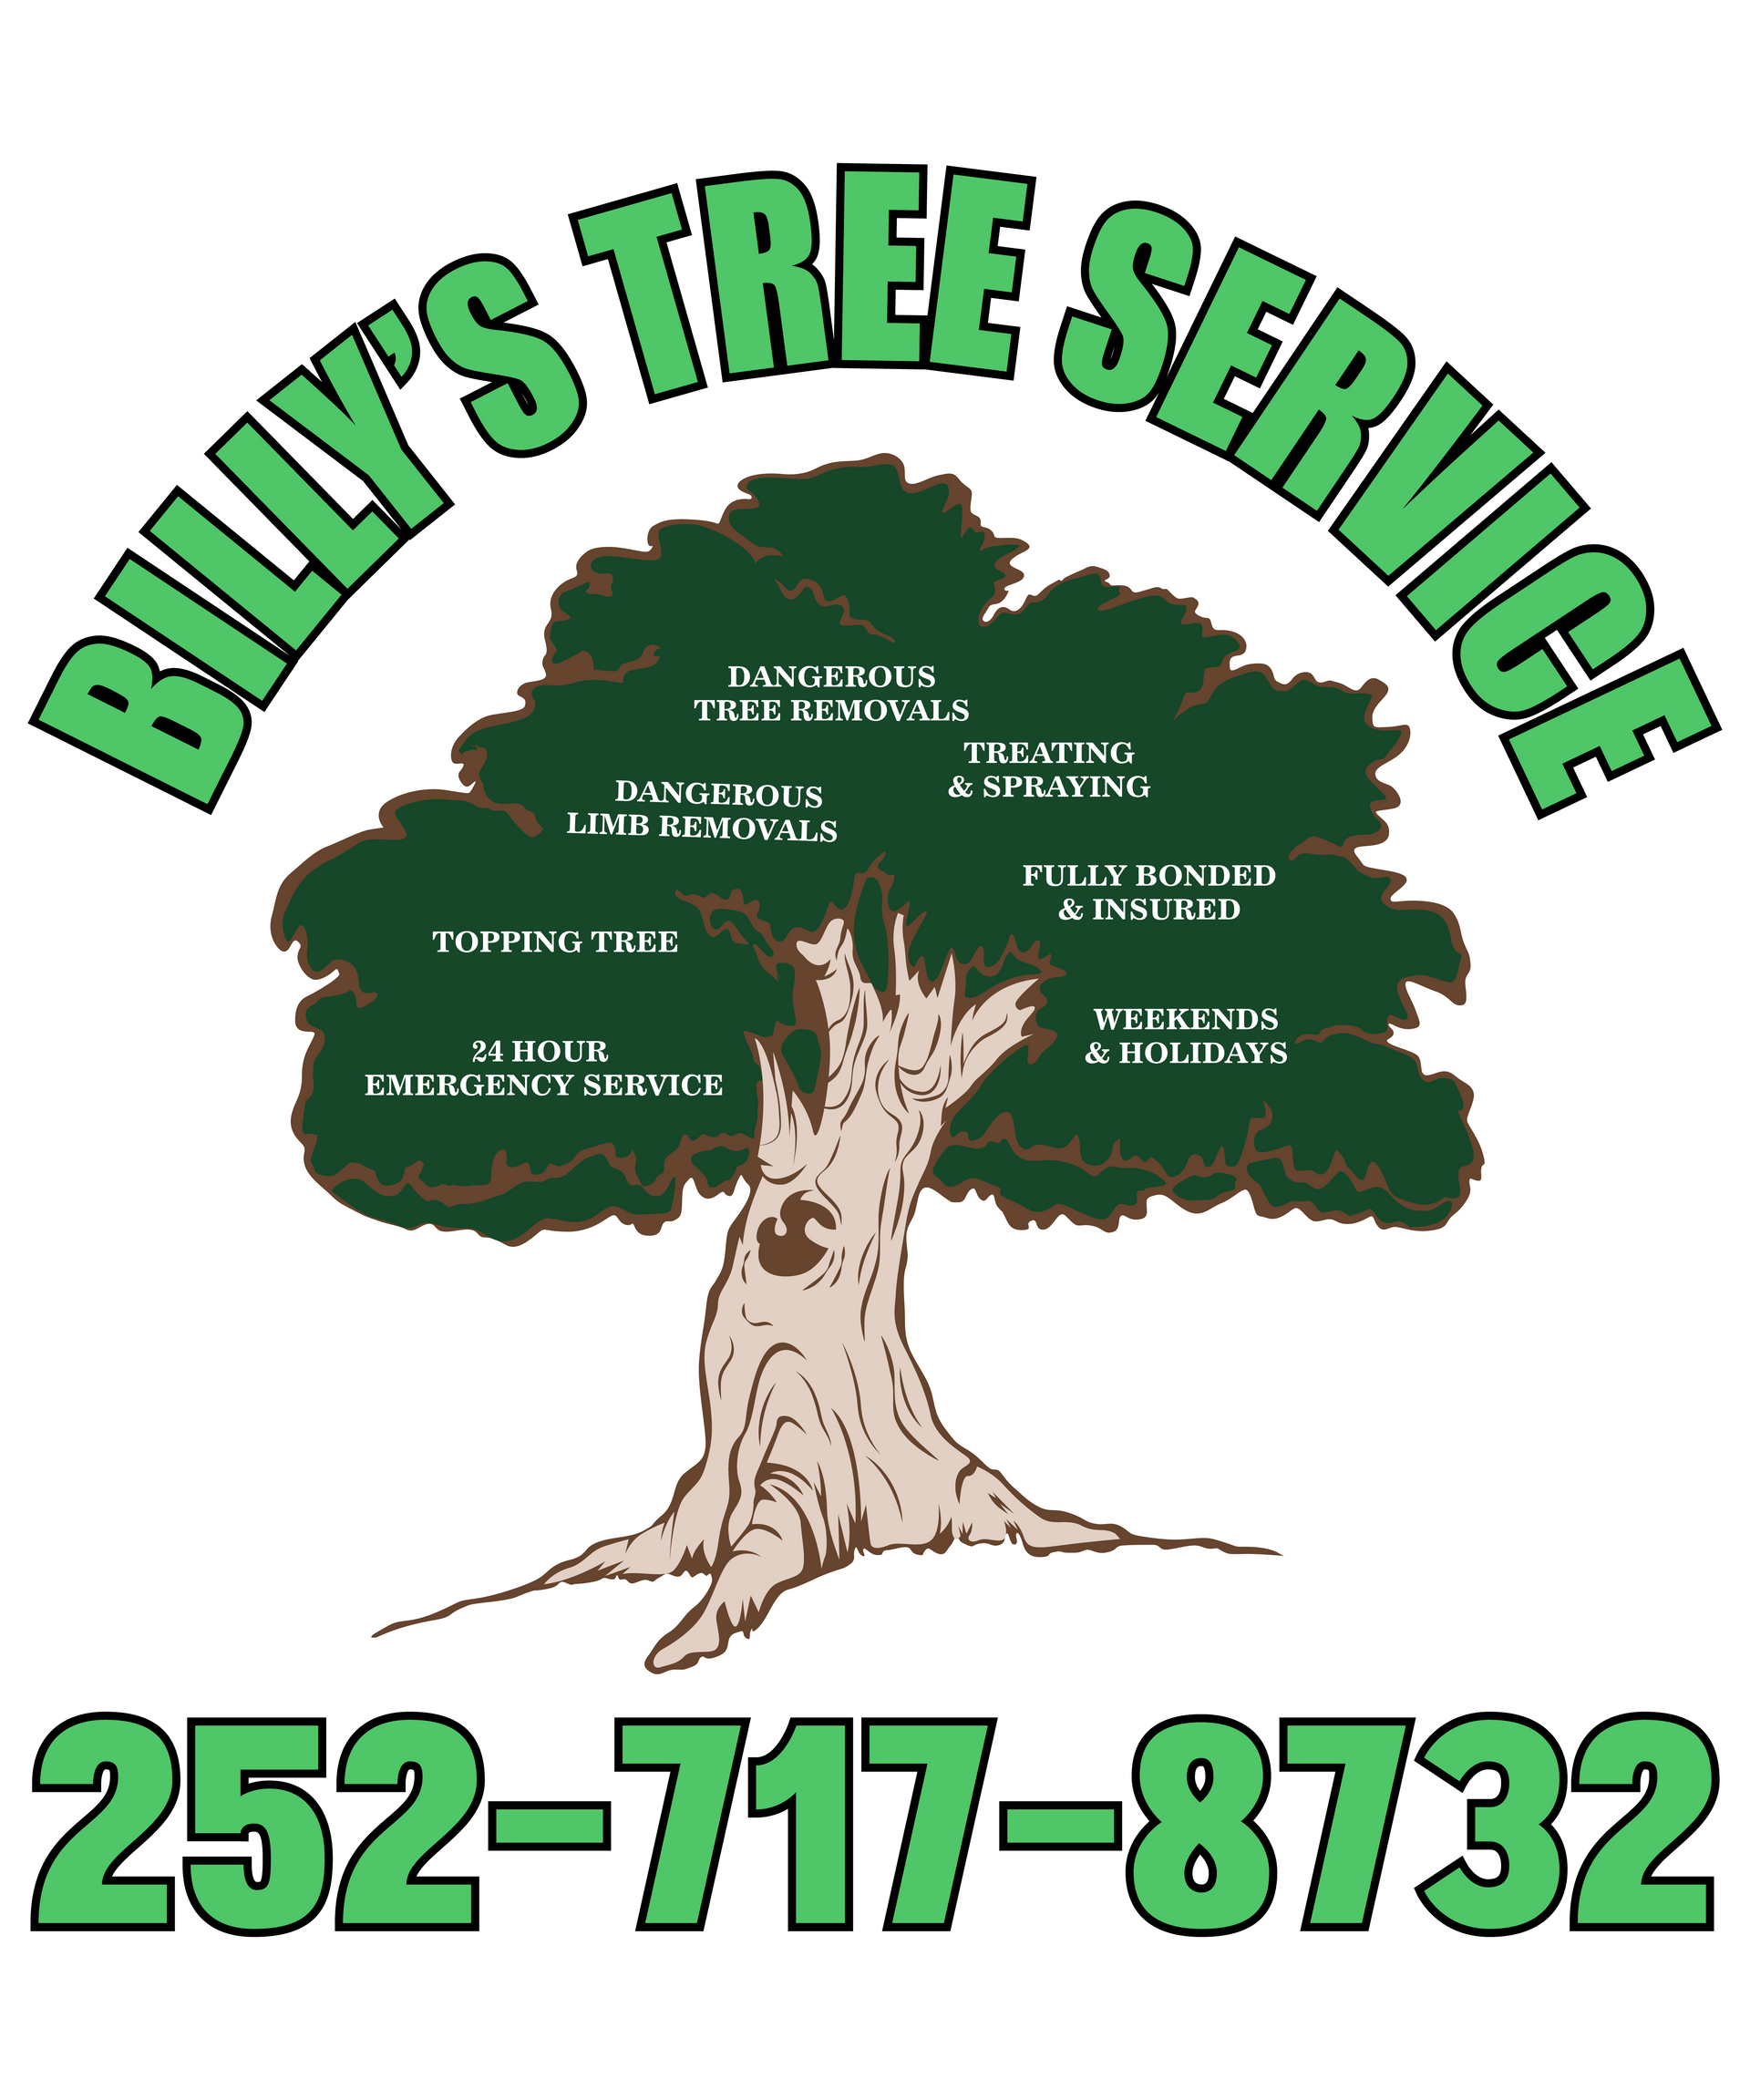 A logo for billy 's tree service with a tree in the center